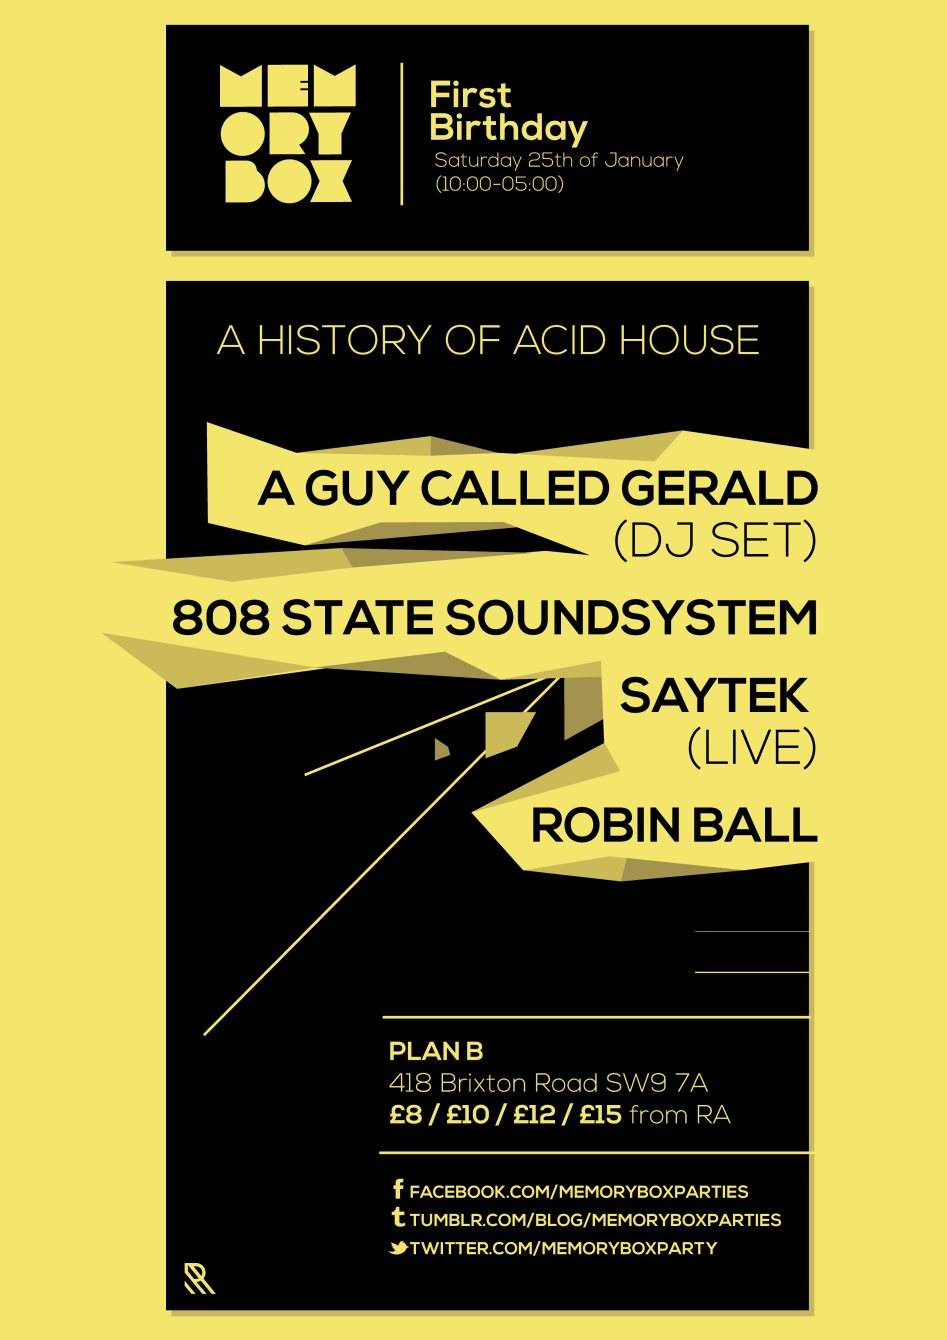 Memory Box 1st Birthday with A Guy Called Gerald, 808 State & Saytek - Flyer front